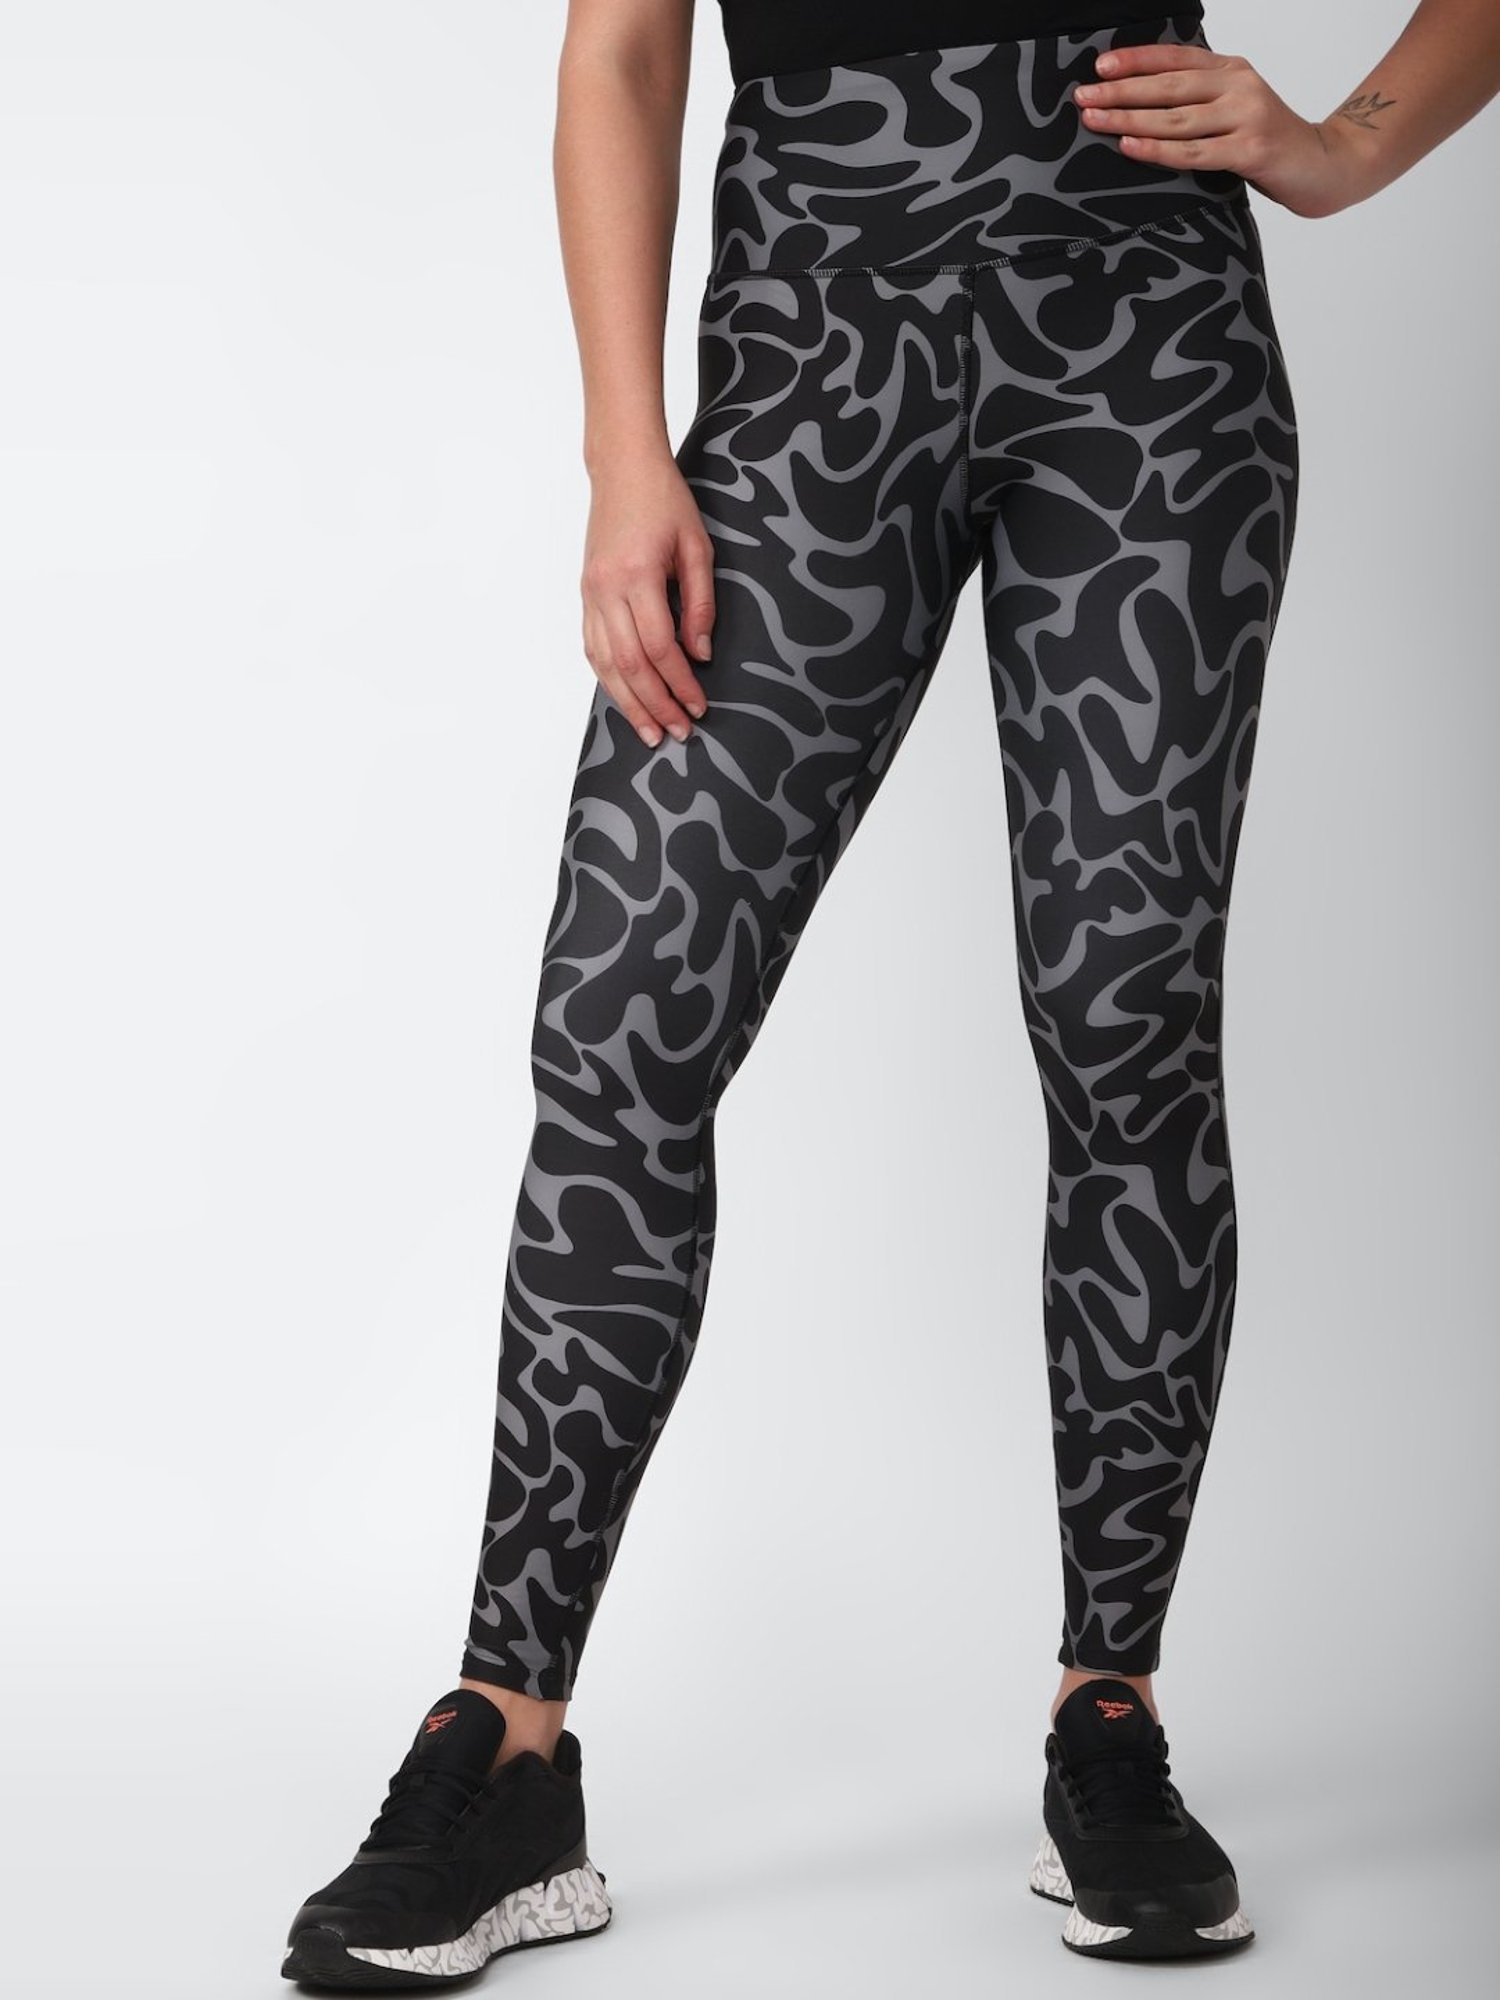 Nike Womens Pro Just Do It Logo Tights Black/White 803108-010 Size Medium :  Amazon.in: Clothing & Accessories